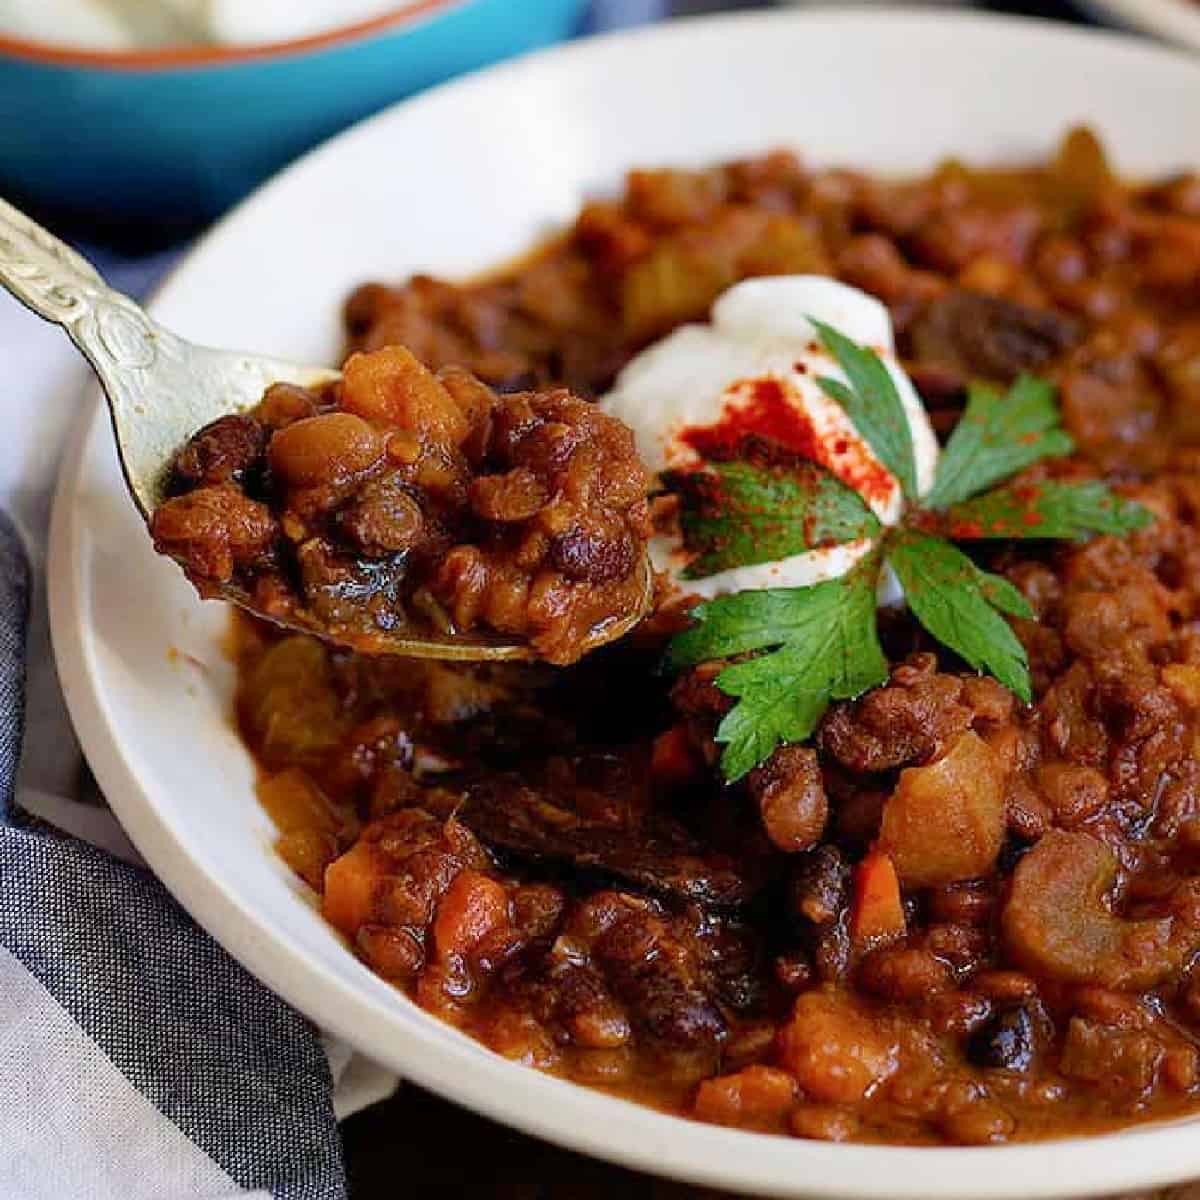 Have the best comfort food on your table in less than 30 minutes. This quick vegetarian chili is is ready in no time and is bursting with flavor! 
